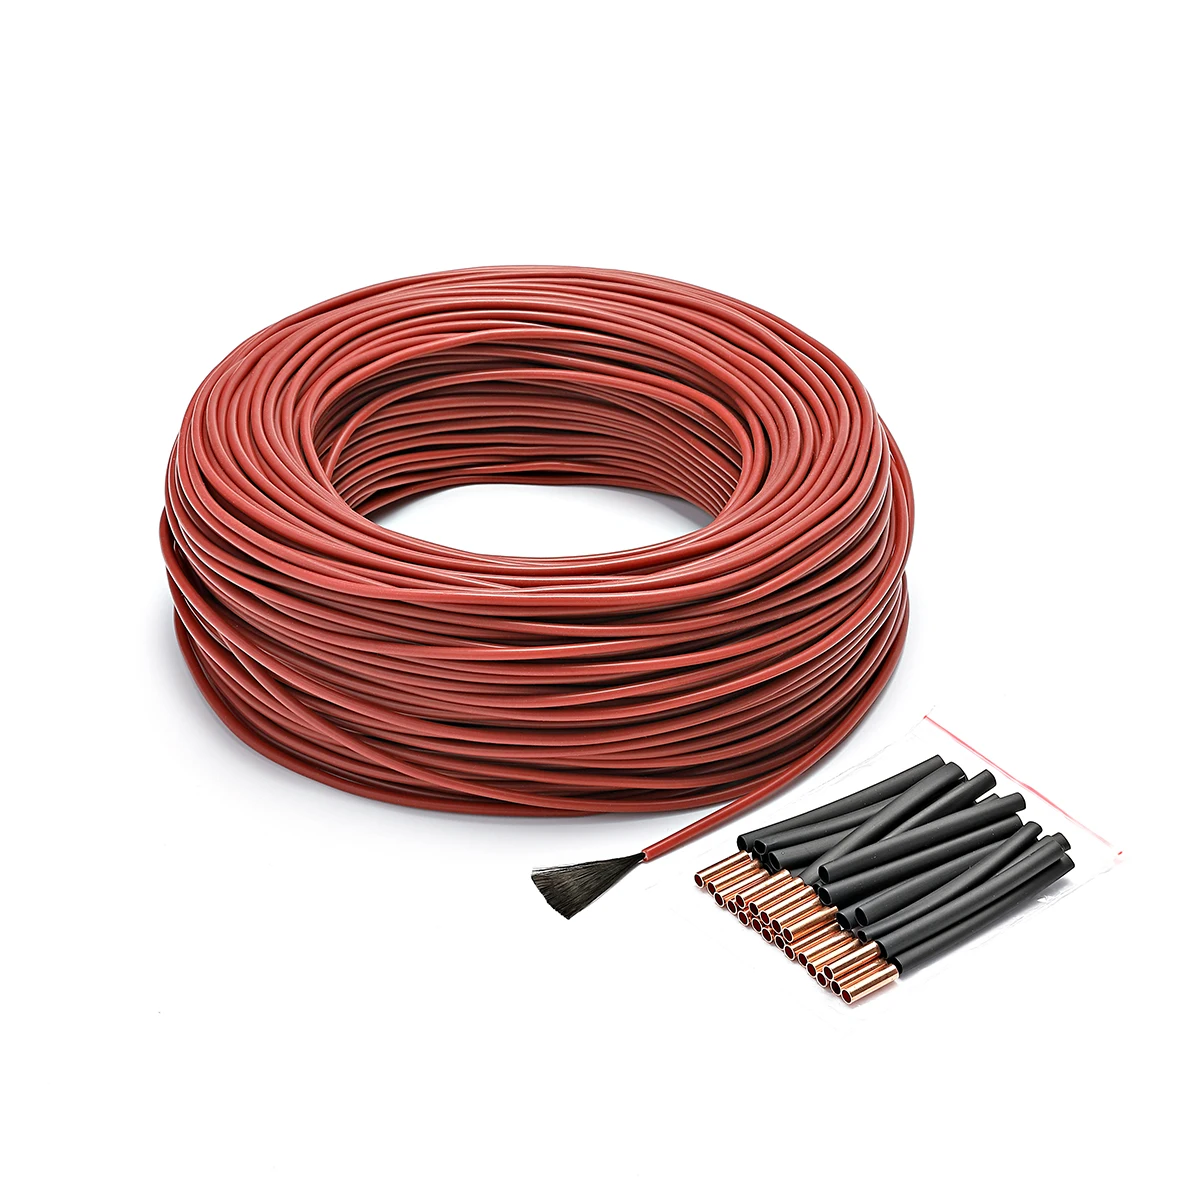 House Home fluoroplastic carbon fiber  Upgrade m 100Meters 33 Ohm/m  Silicone ru - £19.98 GBP